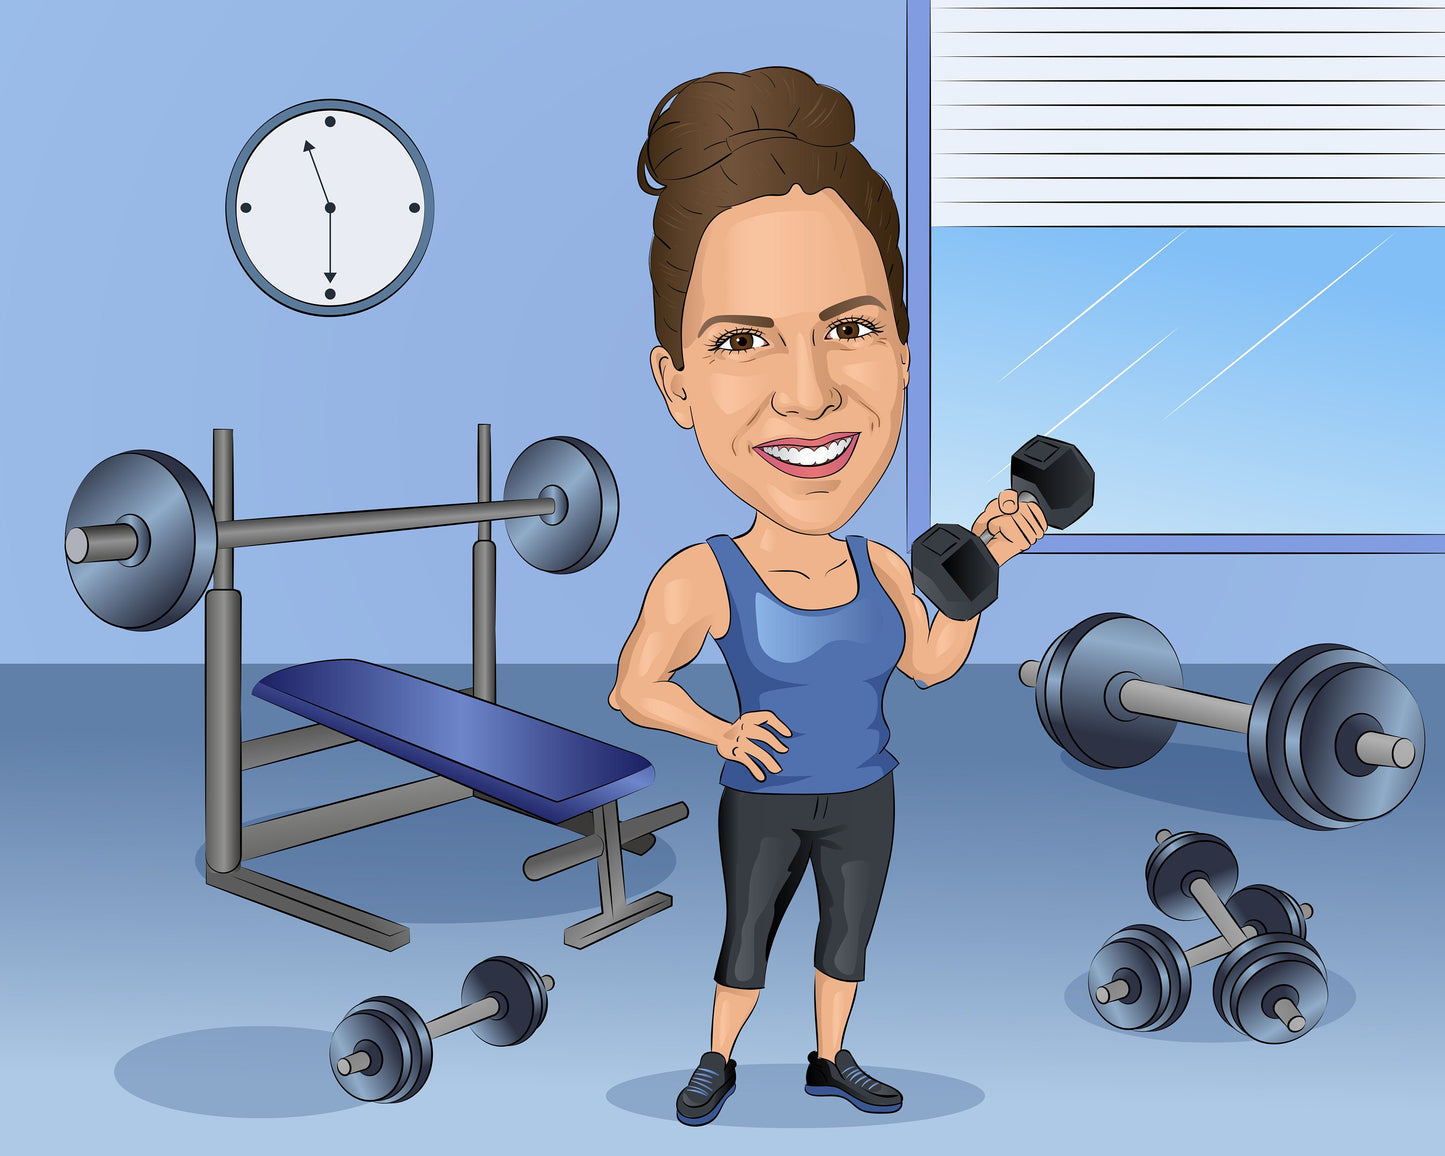 Gym Teacher Gift - Custom Caricature From Photo, fitness instructor gift, fitness coach, gym trainer